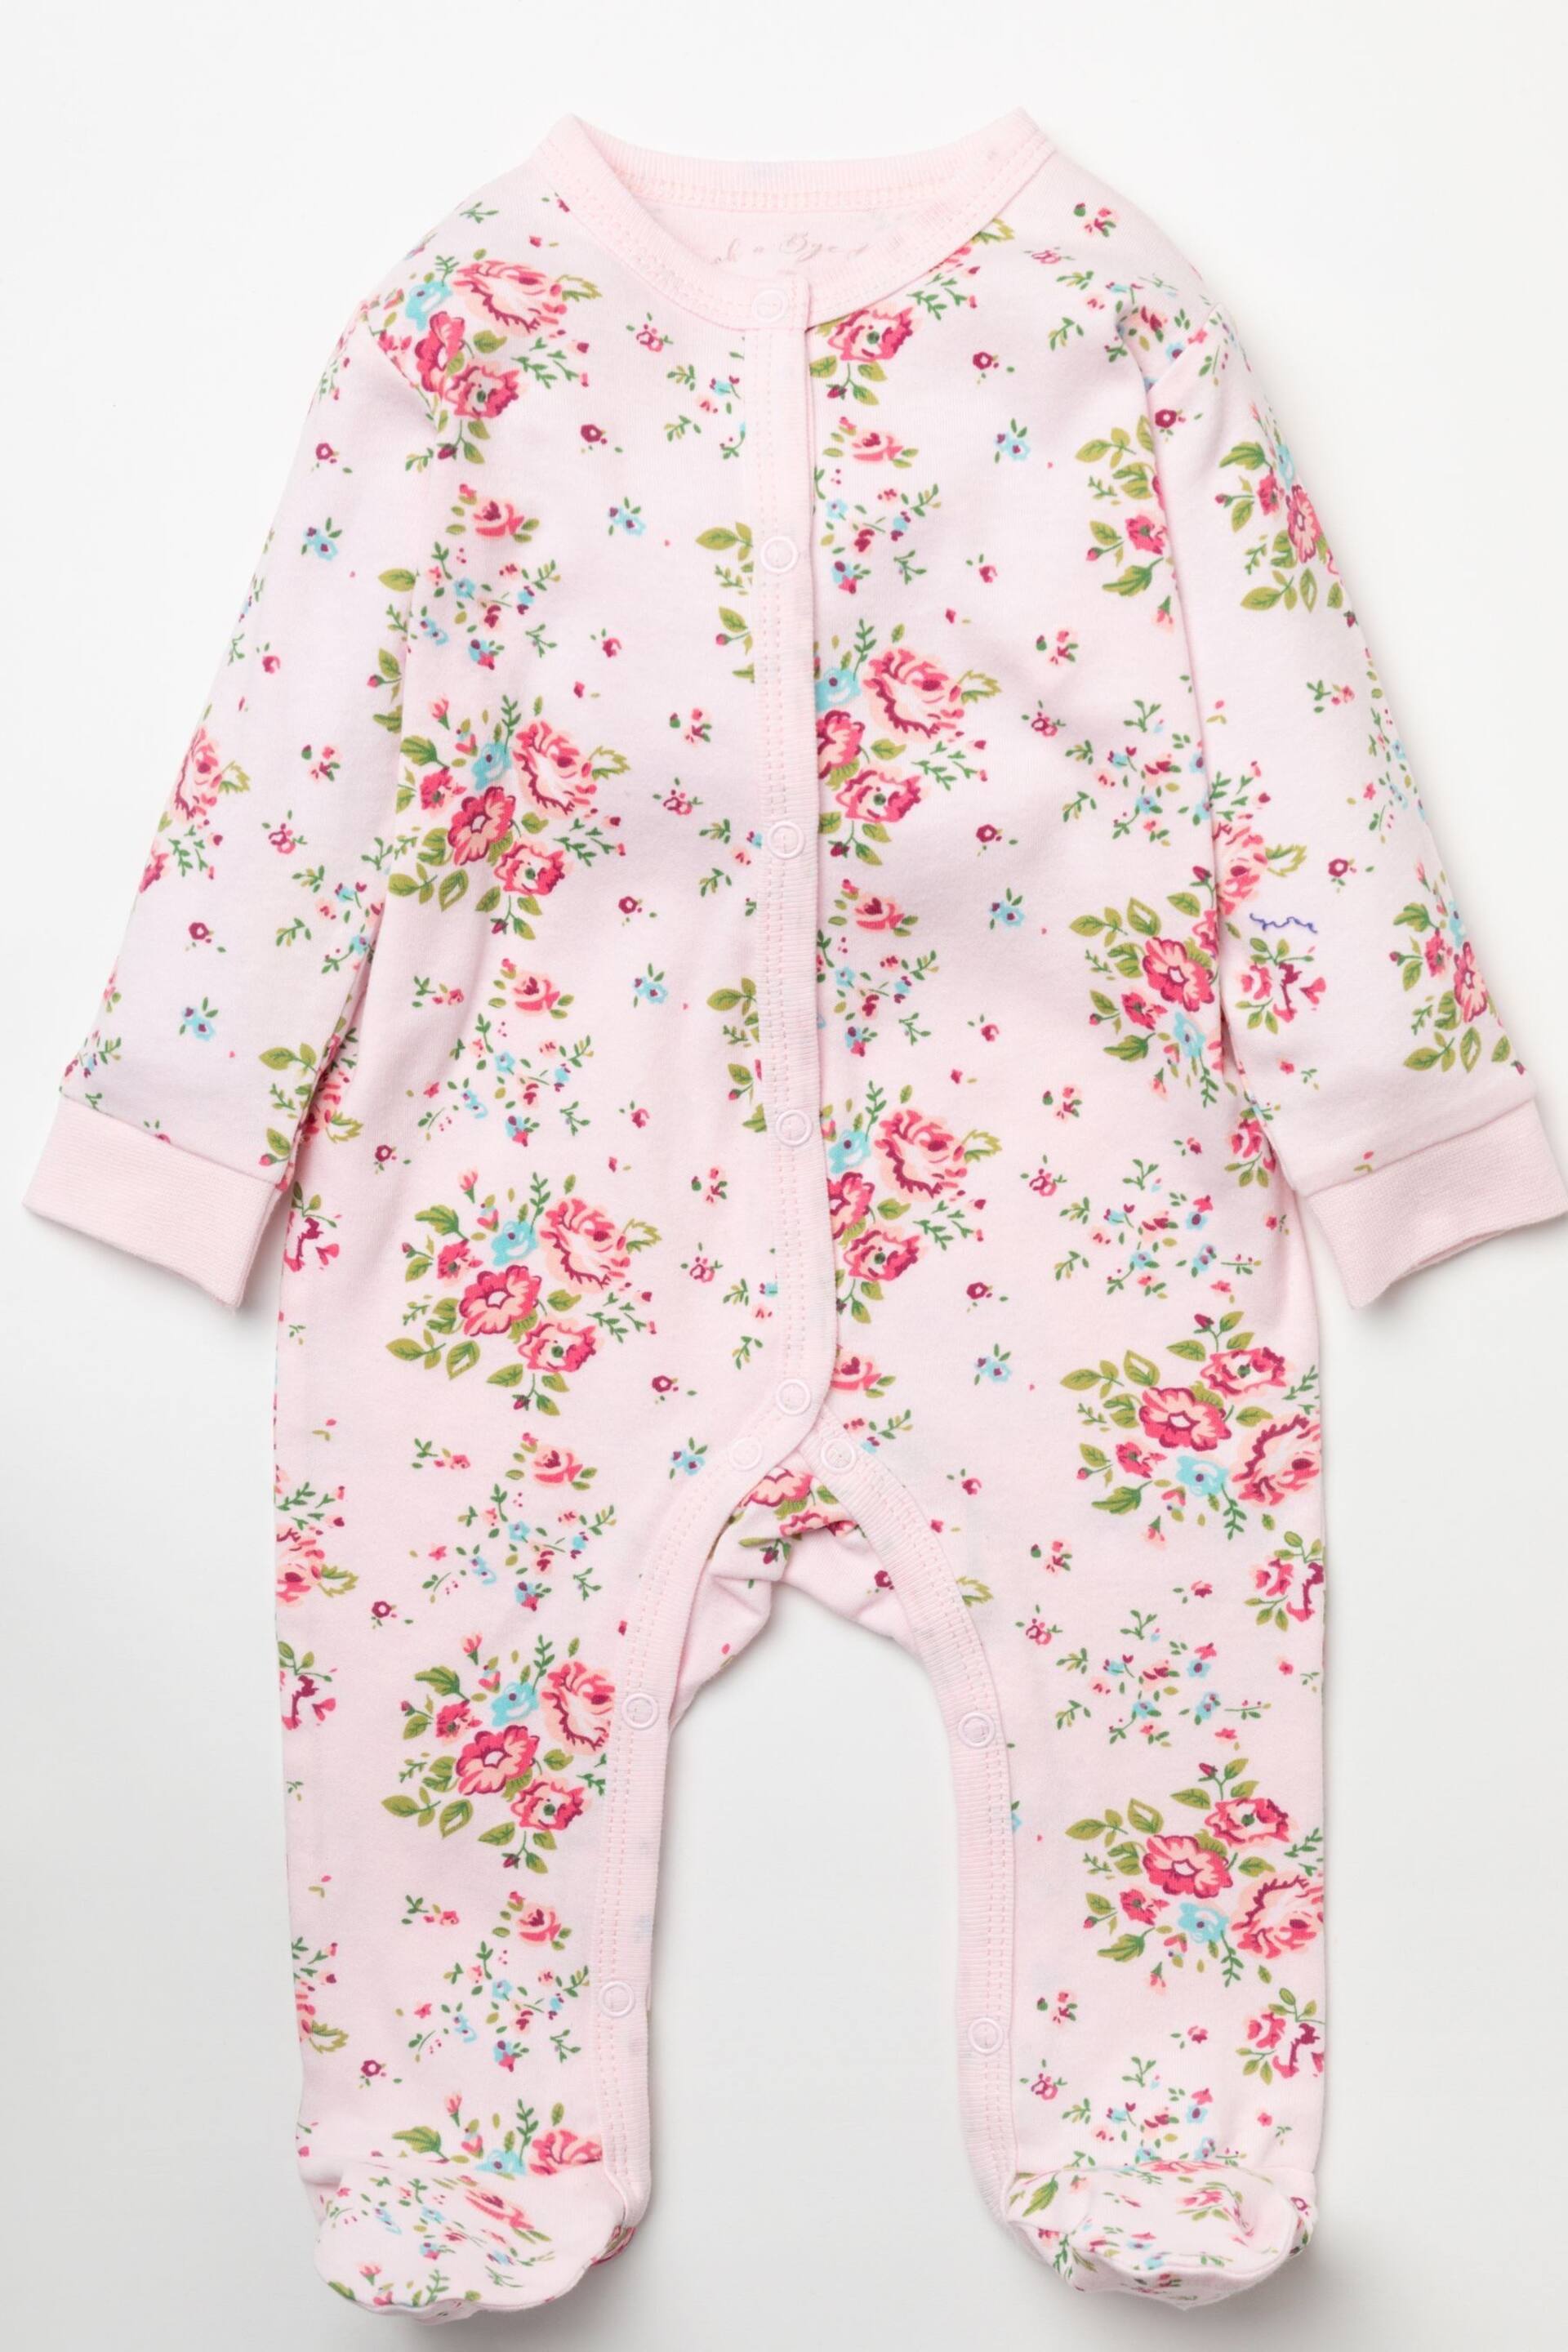 Rock-A-Bye Baby Boutique Pink Floral Print Cotton 3-Piece Baby Gift Set - Image 2 of 5